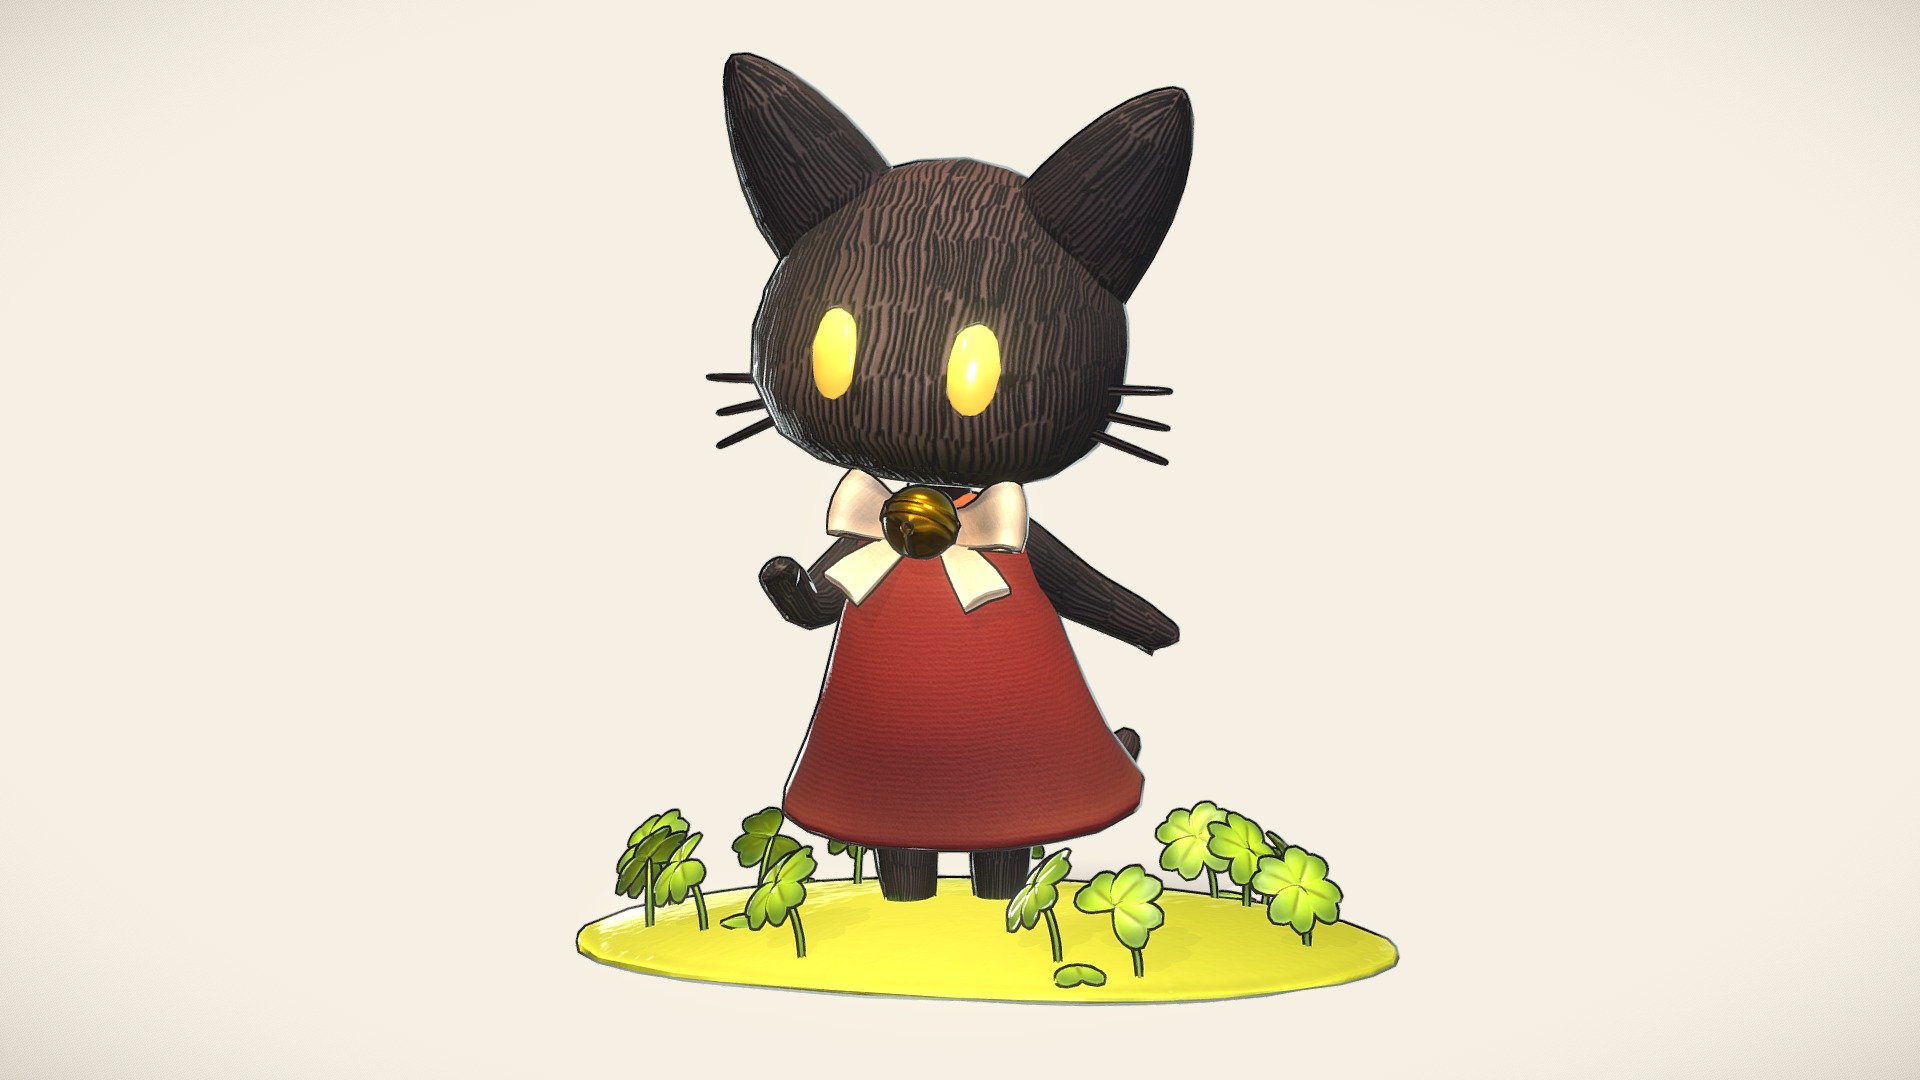 This was a school assignment where we had to make a cute creature and I chose this cute kitty!

Original concept by Maniani on Twitter 3d model